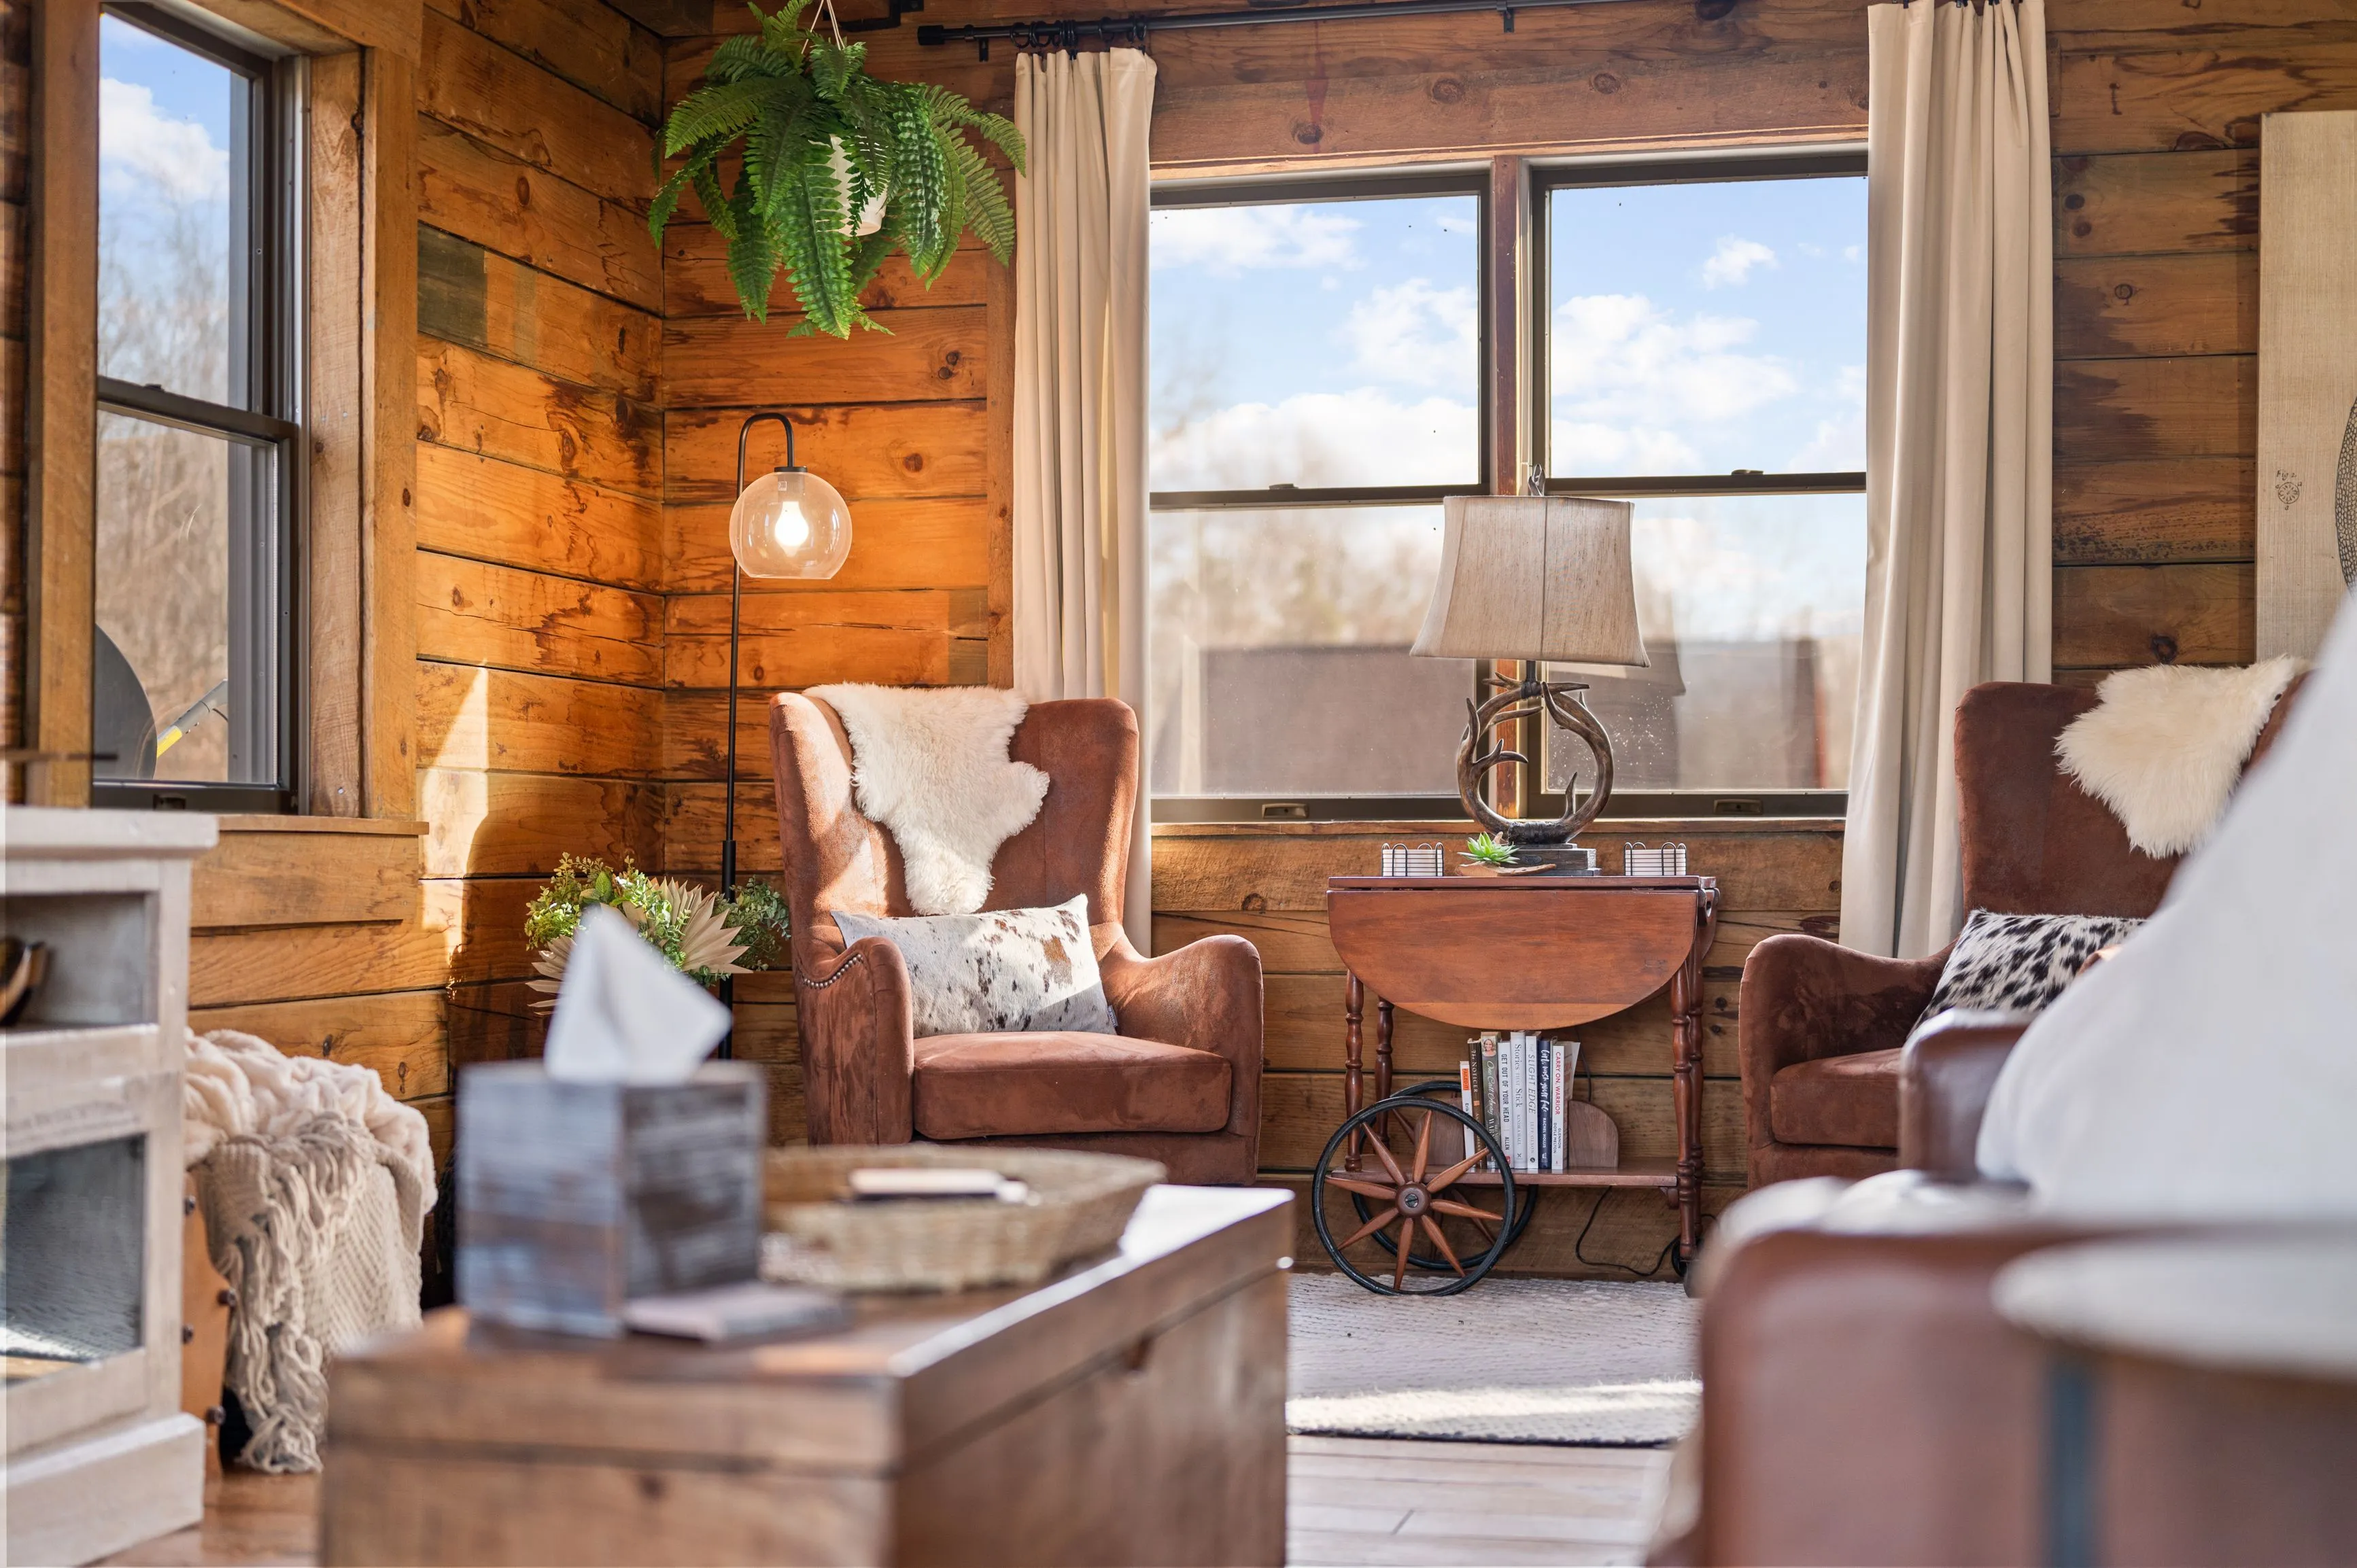 Cozy cabin living room with wooden walls, leather chairs, and a fireplace.